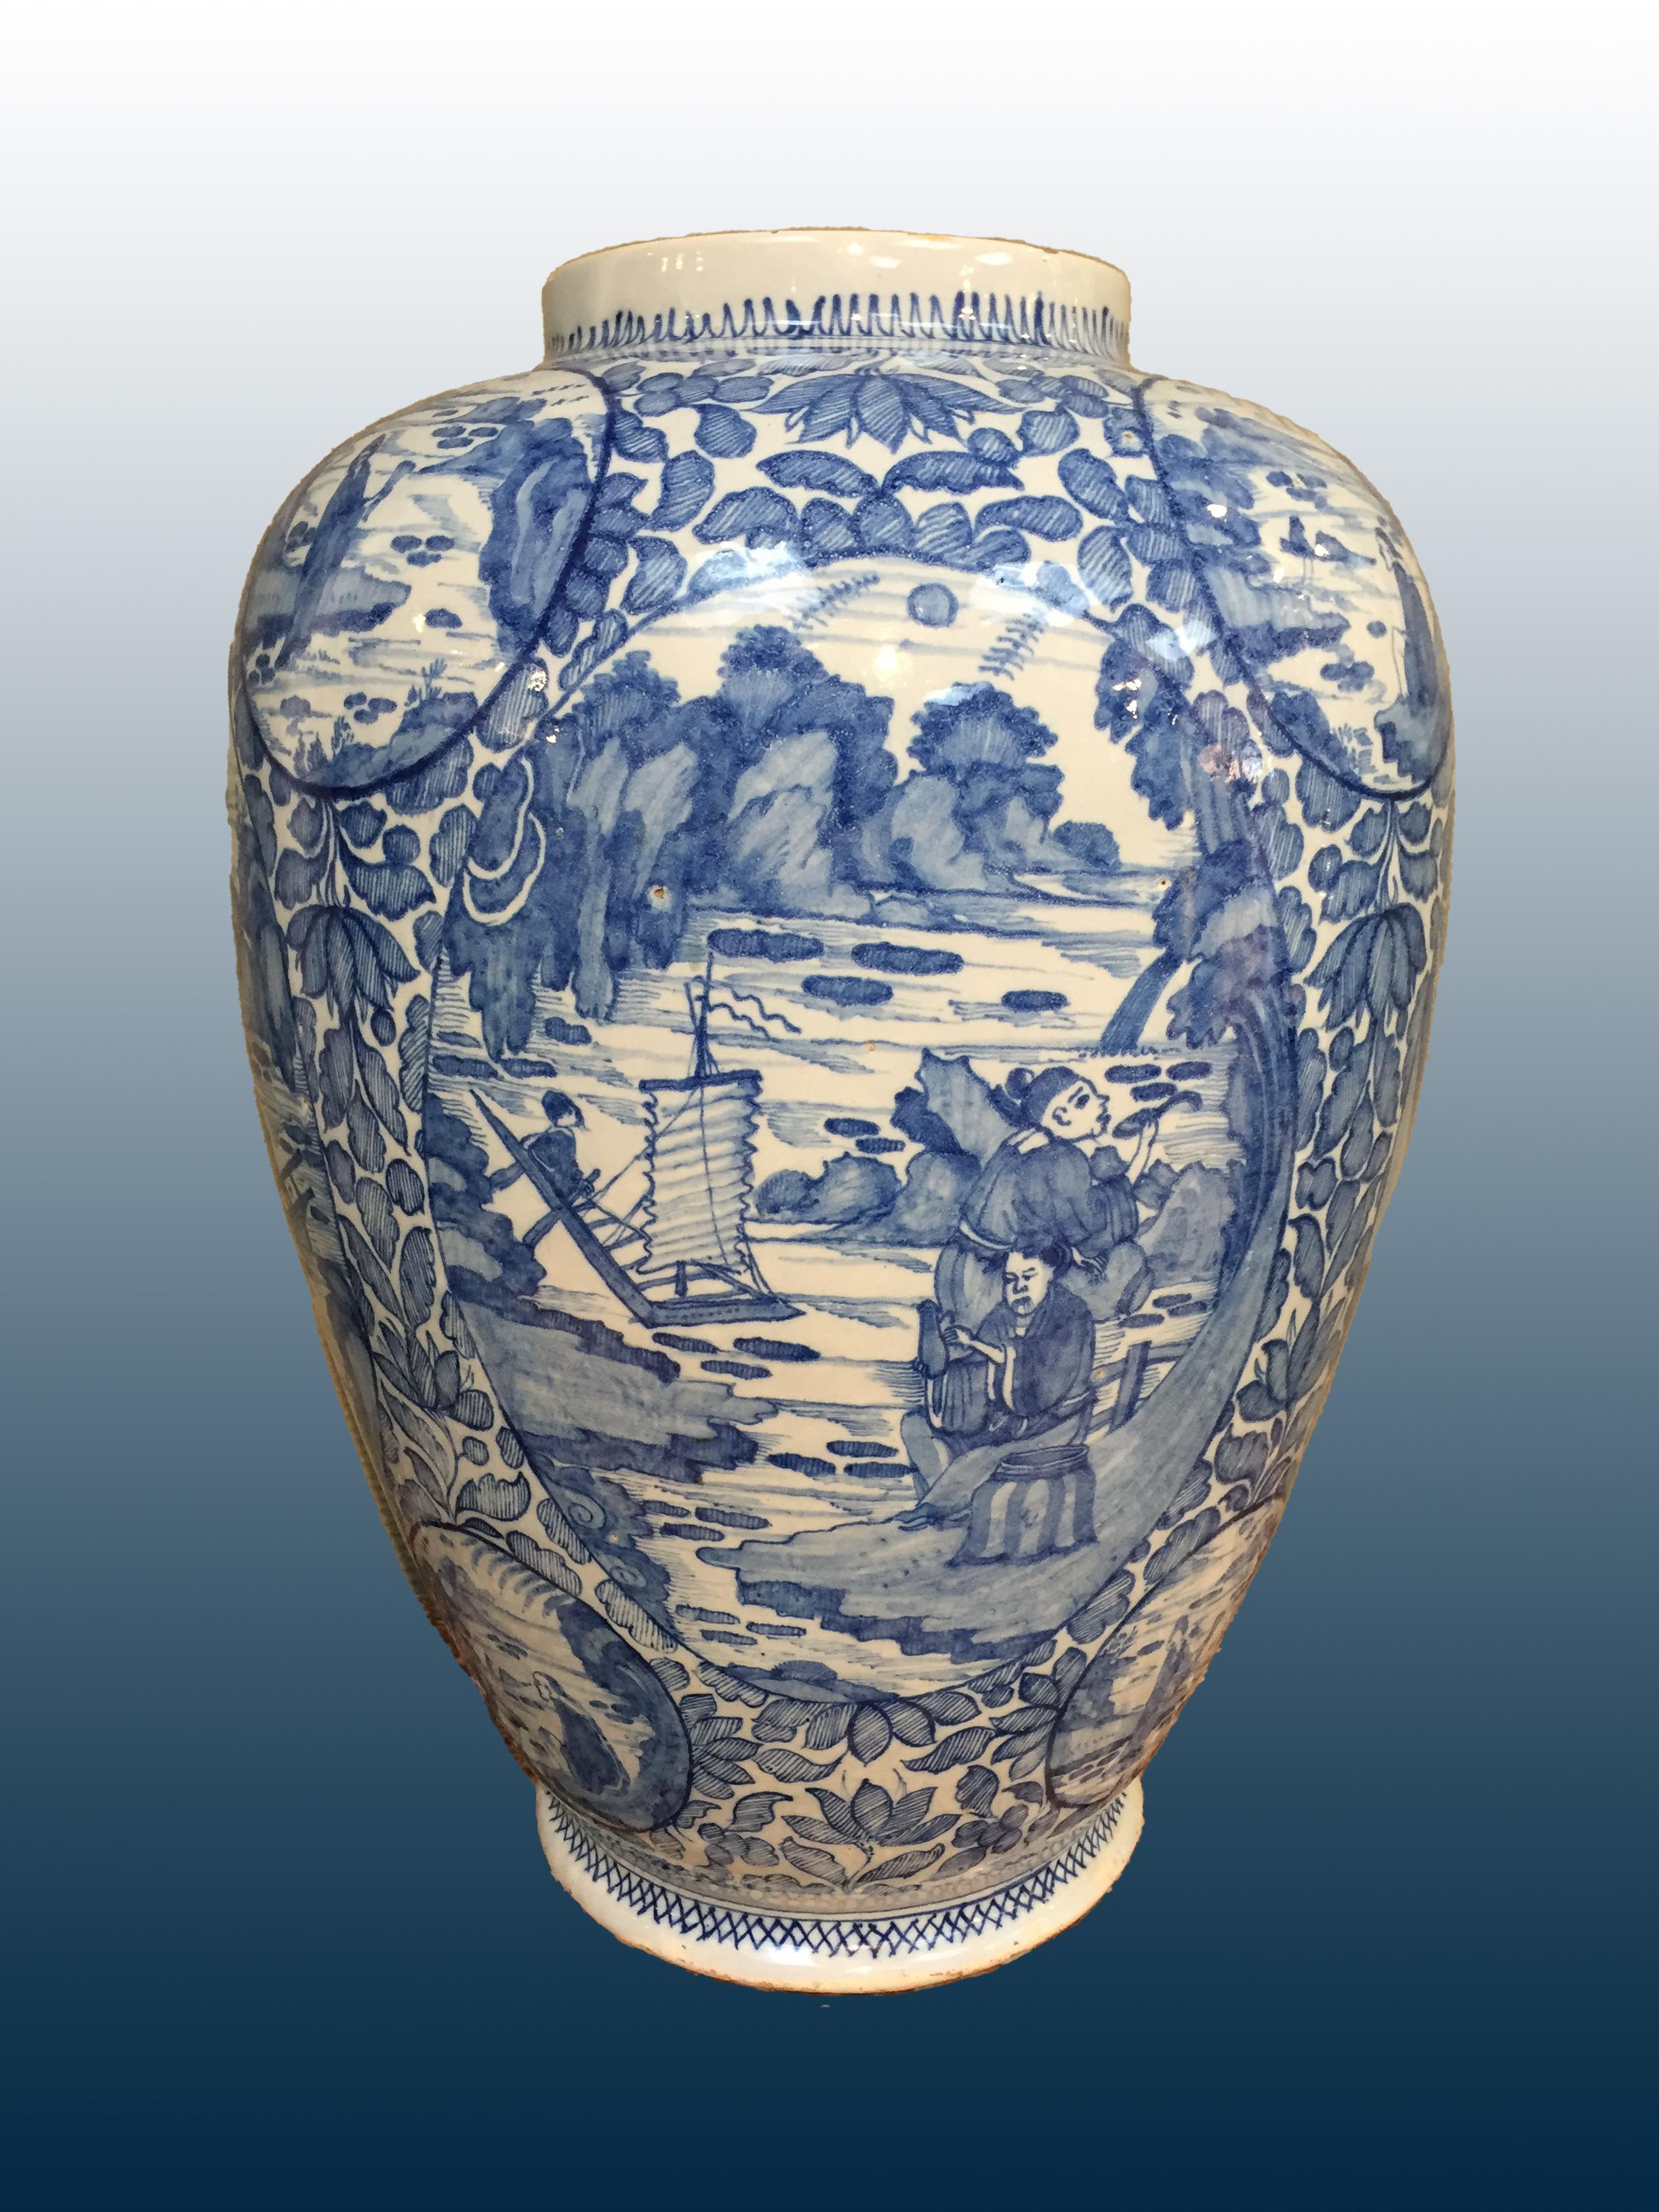 A Rare and Very Large, Early Dutch Delftware vase with chinoiserie decoration.

Origine: Delft, The Netherlands
Date: 1724 - 1757
Workshop: De Metaale Pot under the management of Cornelis Koppens.
Marked CK for Cornelis Koppens.

The very